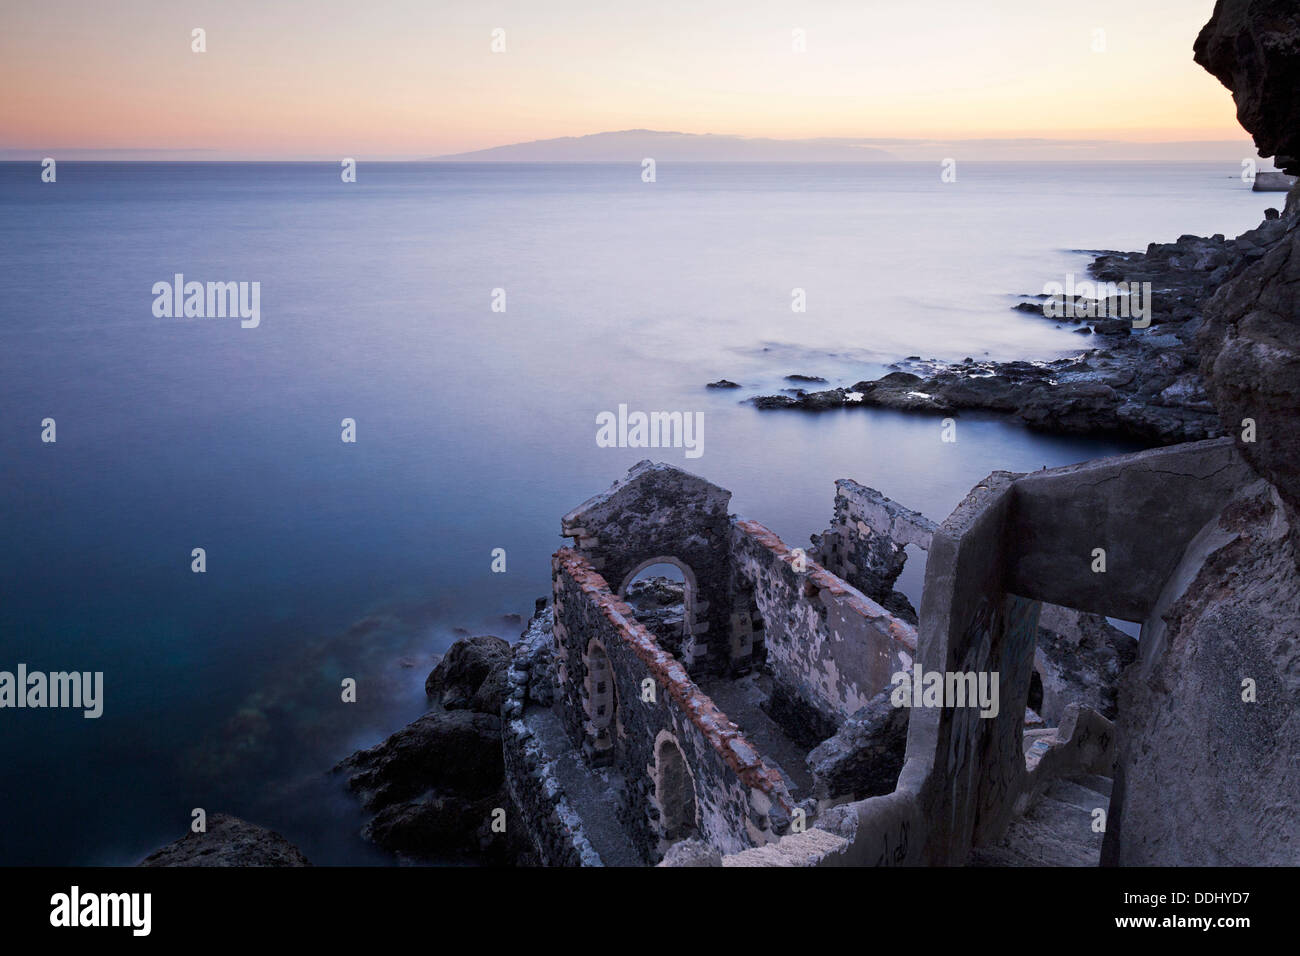 Long exposure images of the old pumphouse at Playa San juan, tenerife, Canary Islands, Spain. 10stop ND filter. Stock Photo